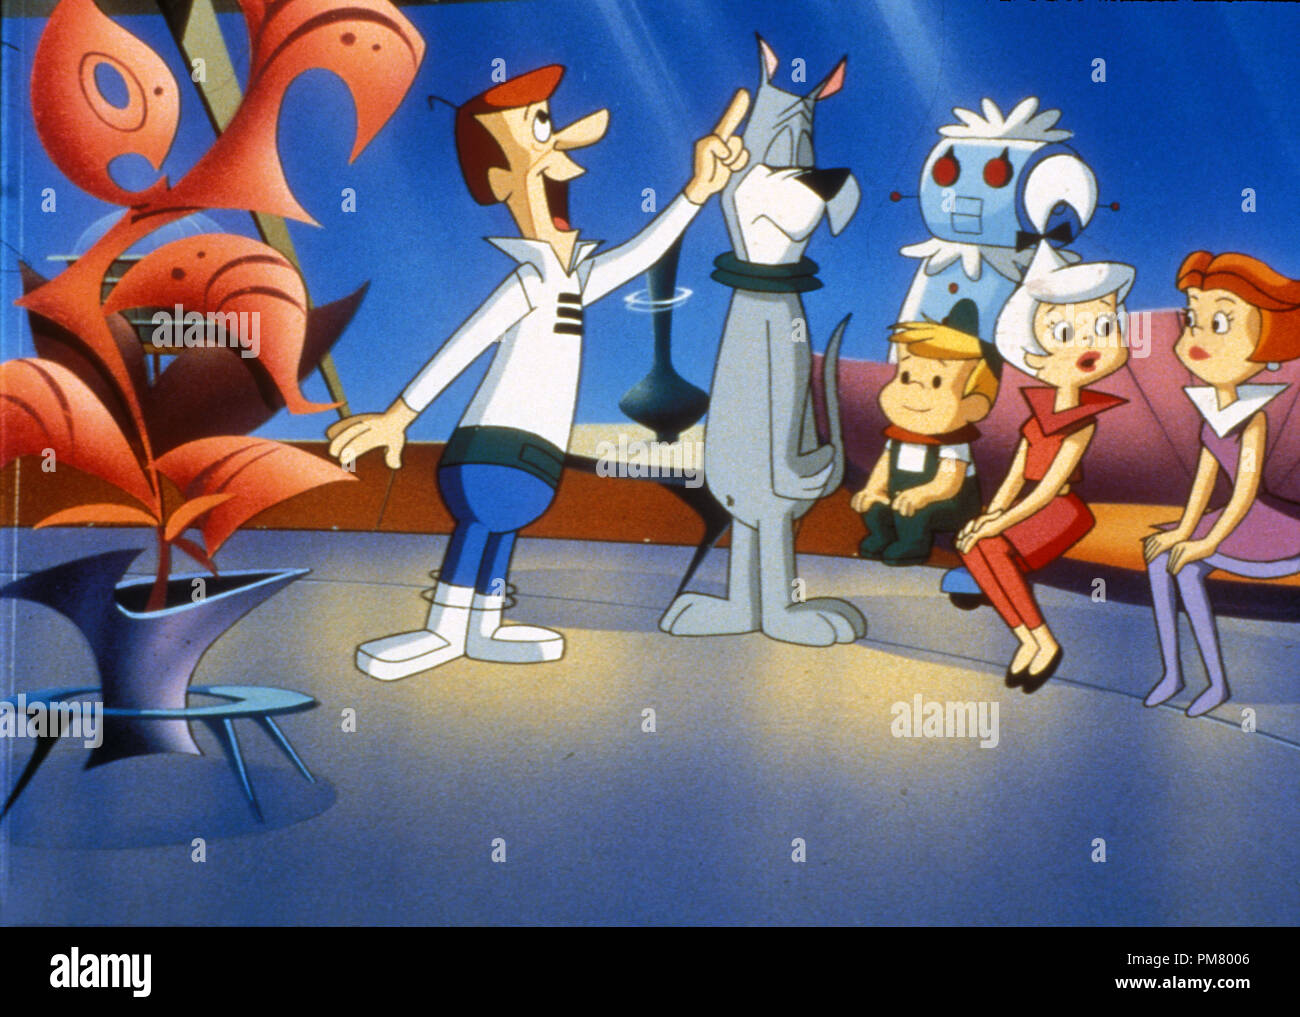 Film still or Publicity still from 'Jetsons: The Movie' George Jetson, Astro, Rosie the Robot, Elroy Jetson, Judy Jetson and Jane Jetson © 1990 Universal All Rights Reserved   File Reference # 31571200THA  For Editorial Use Only Stock Photo